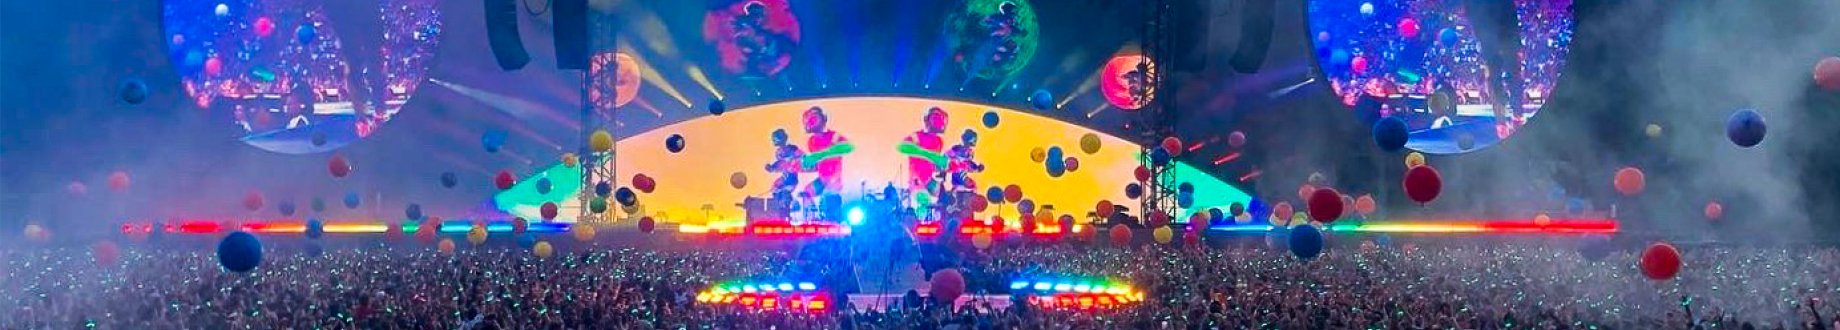 COLDPLAY MOTS show Brussels - Stage